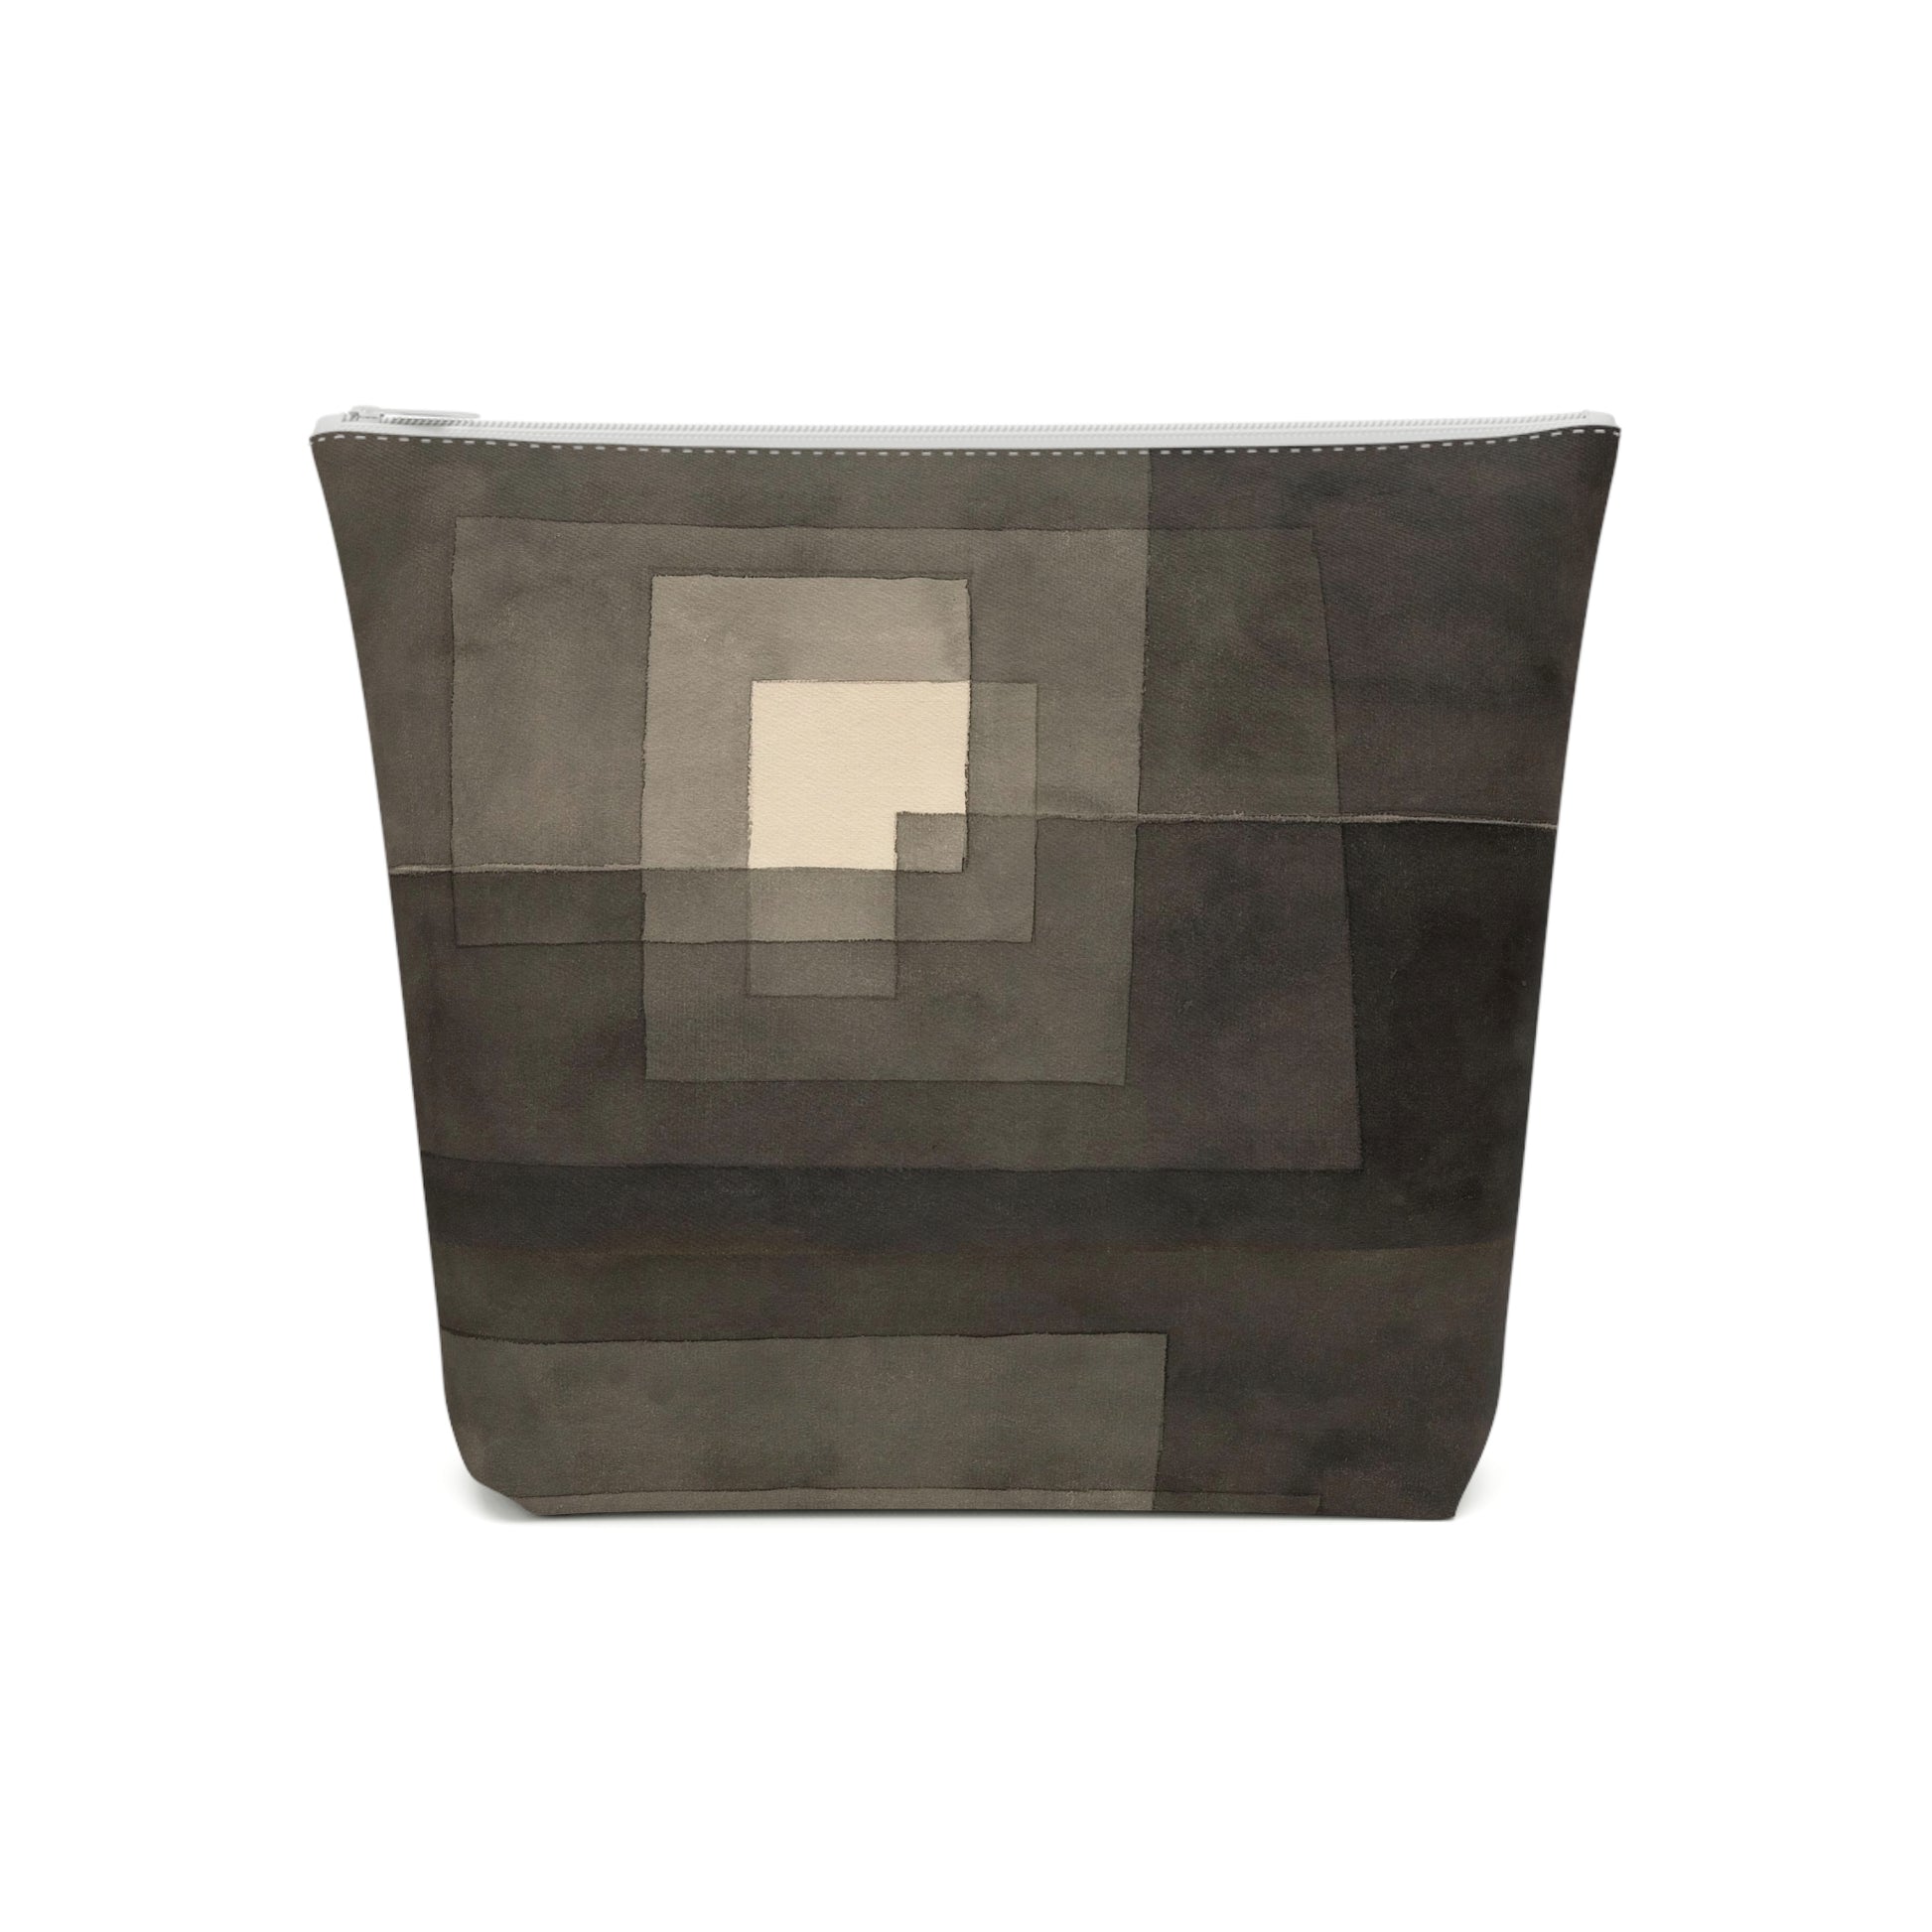 a large gray bag with a square pattern on it